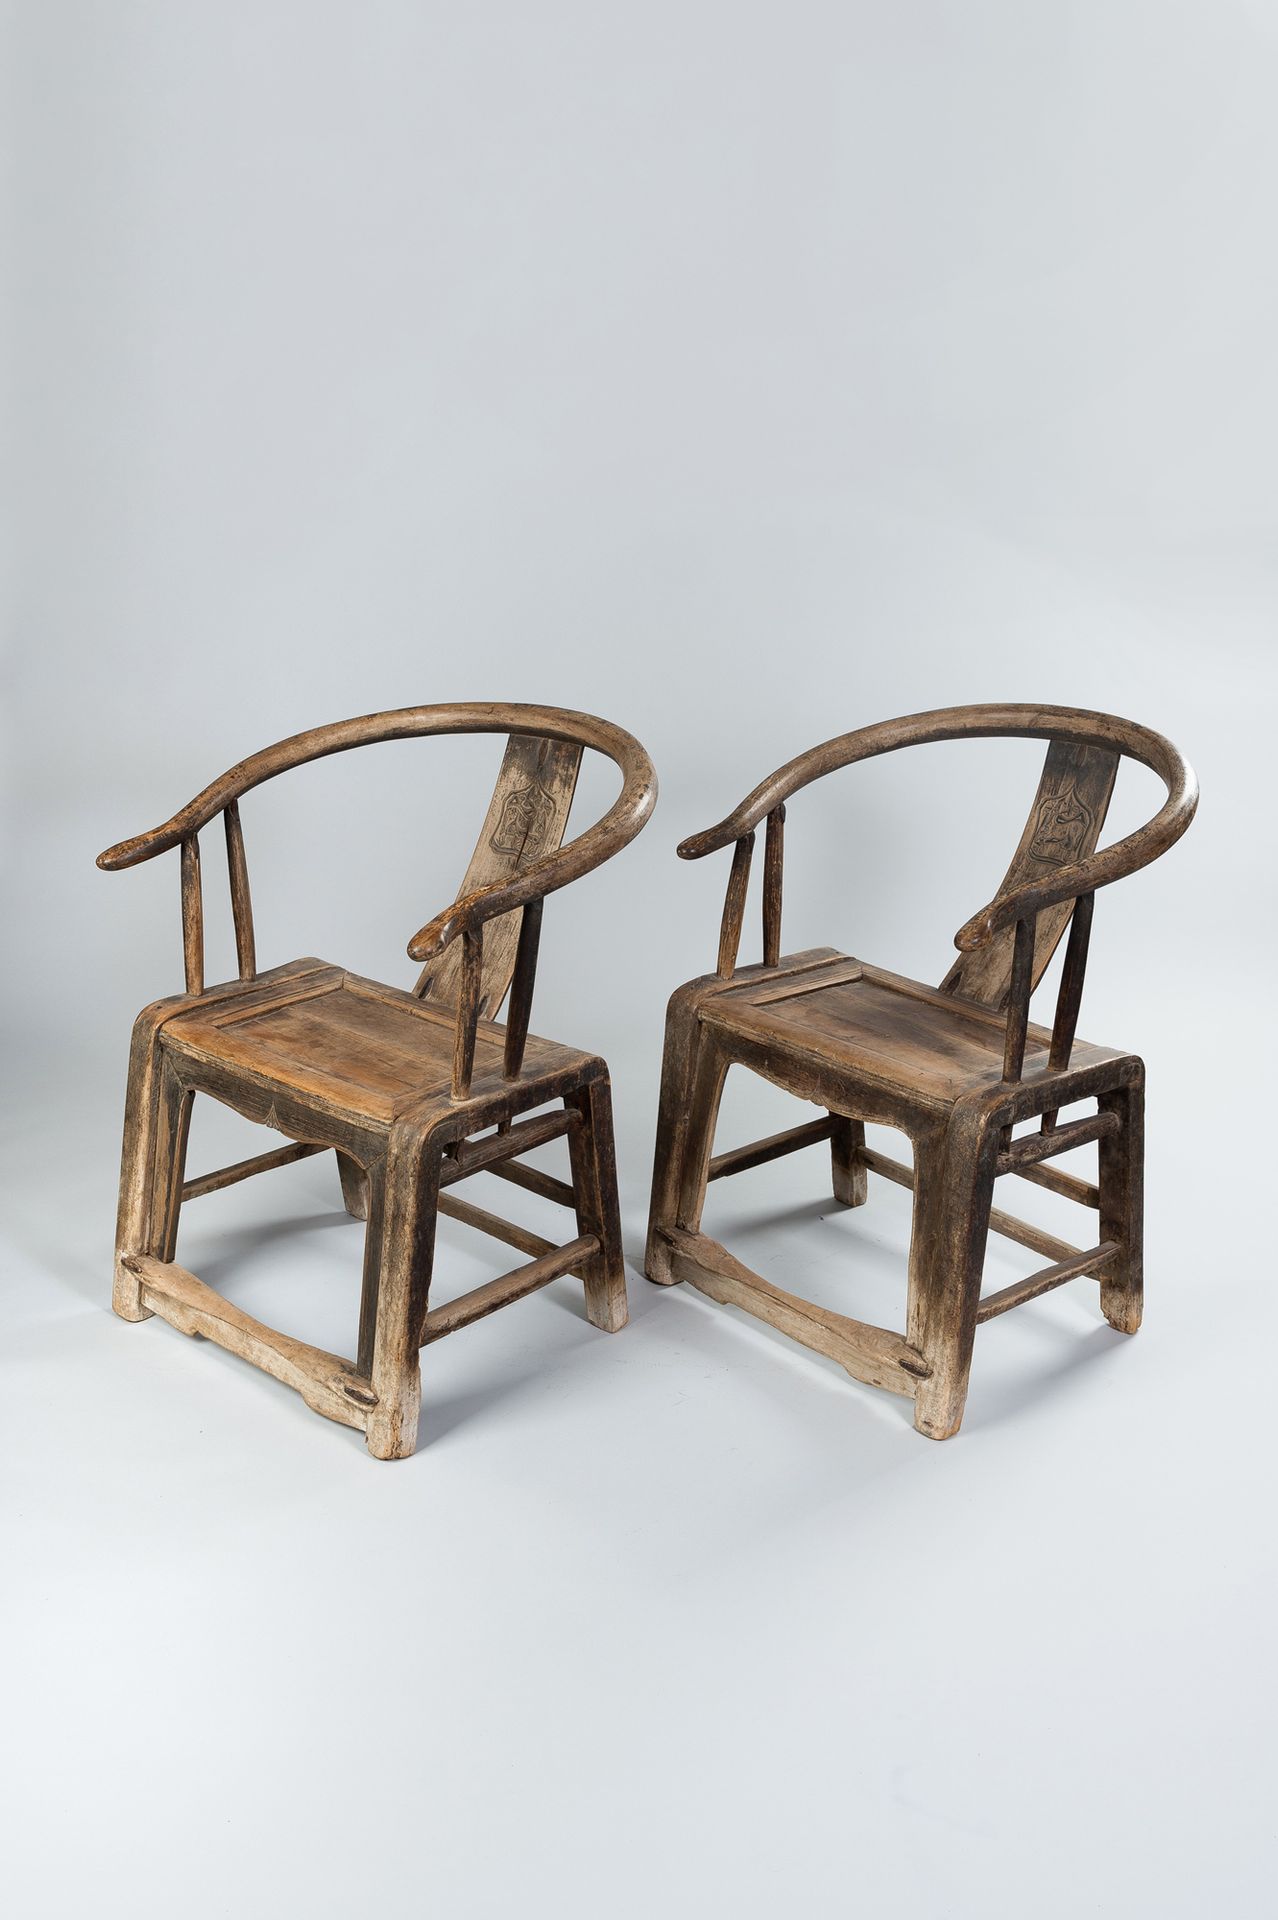 A PAIR OF HORSESHOE WOOD CHAIRS PFERDEHOLZSTÜHLE
China, Qing-Dynastie (1644-1912&hellip;